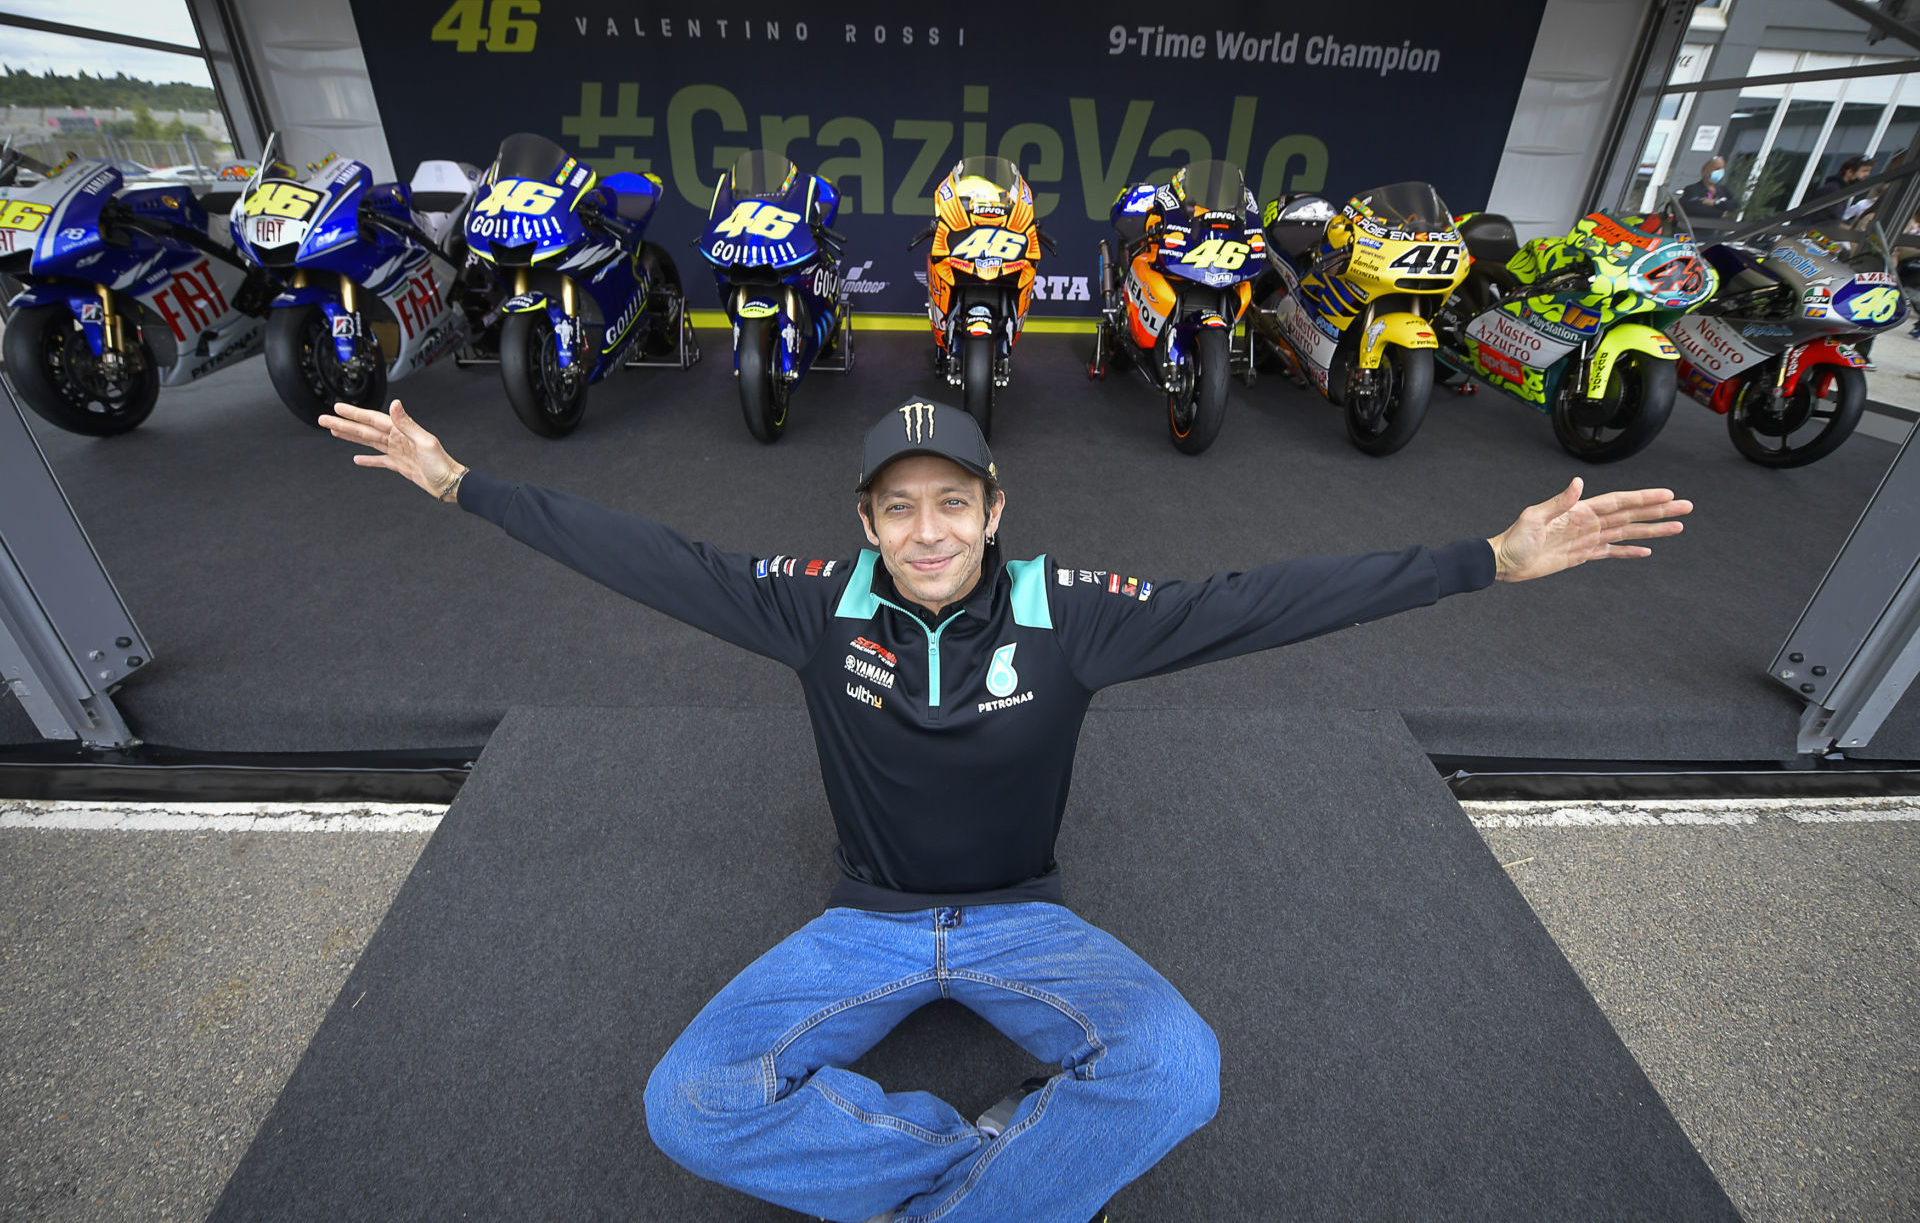 Valentino Rossi reunites with all of his World Championship-winning racebikes, which are arranged in chronological order from right to left. Photo courtesy Dorna.